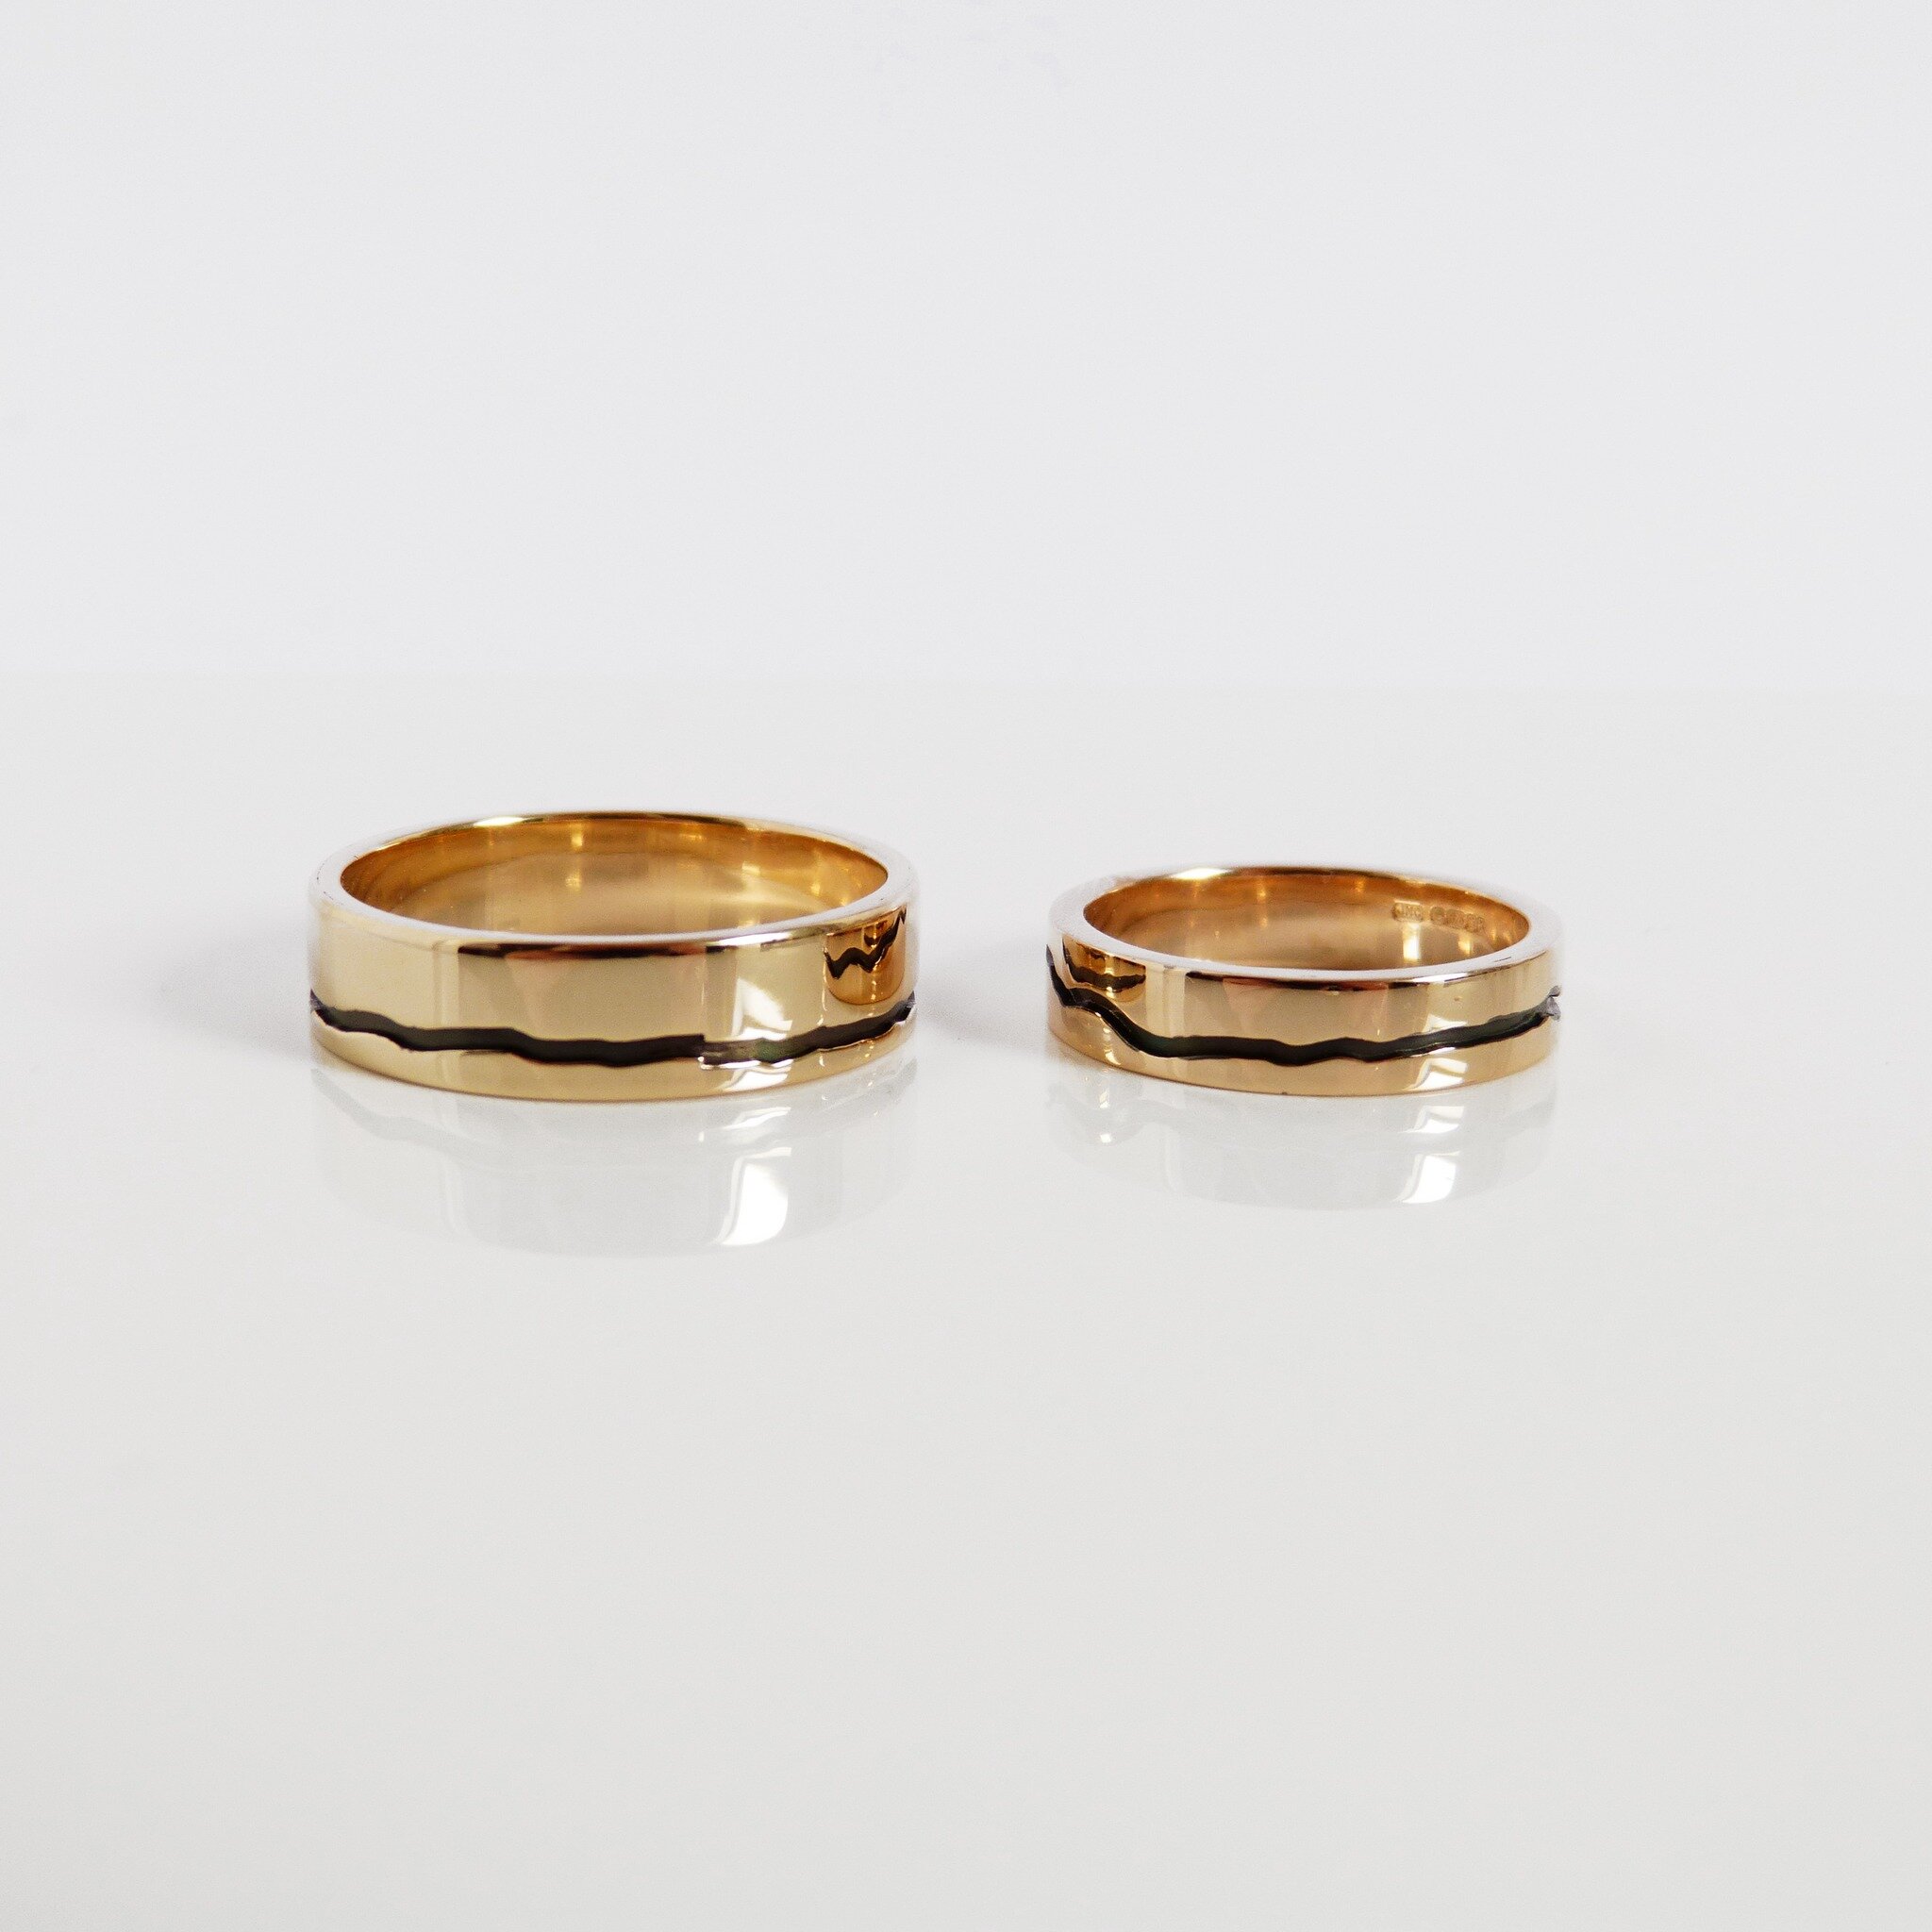 These beautiful gold wedding rings feature the mountains of the Cuillin on Skye. A place that is very special to the couple, so it was only fitting to have it on their wedding rings. Her ring was made with gold from heirloom jewellery and his ring wa